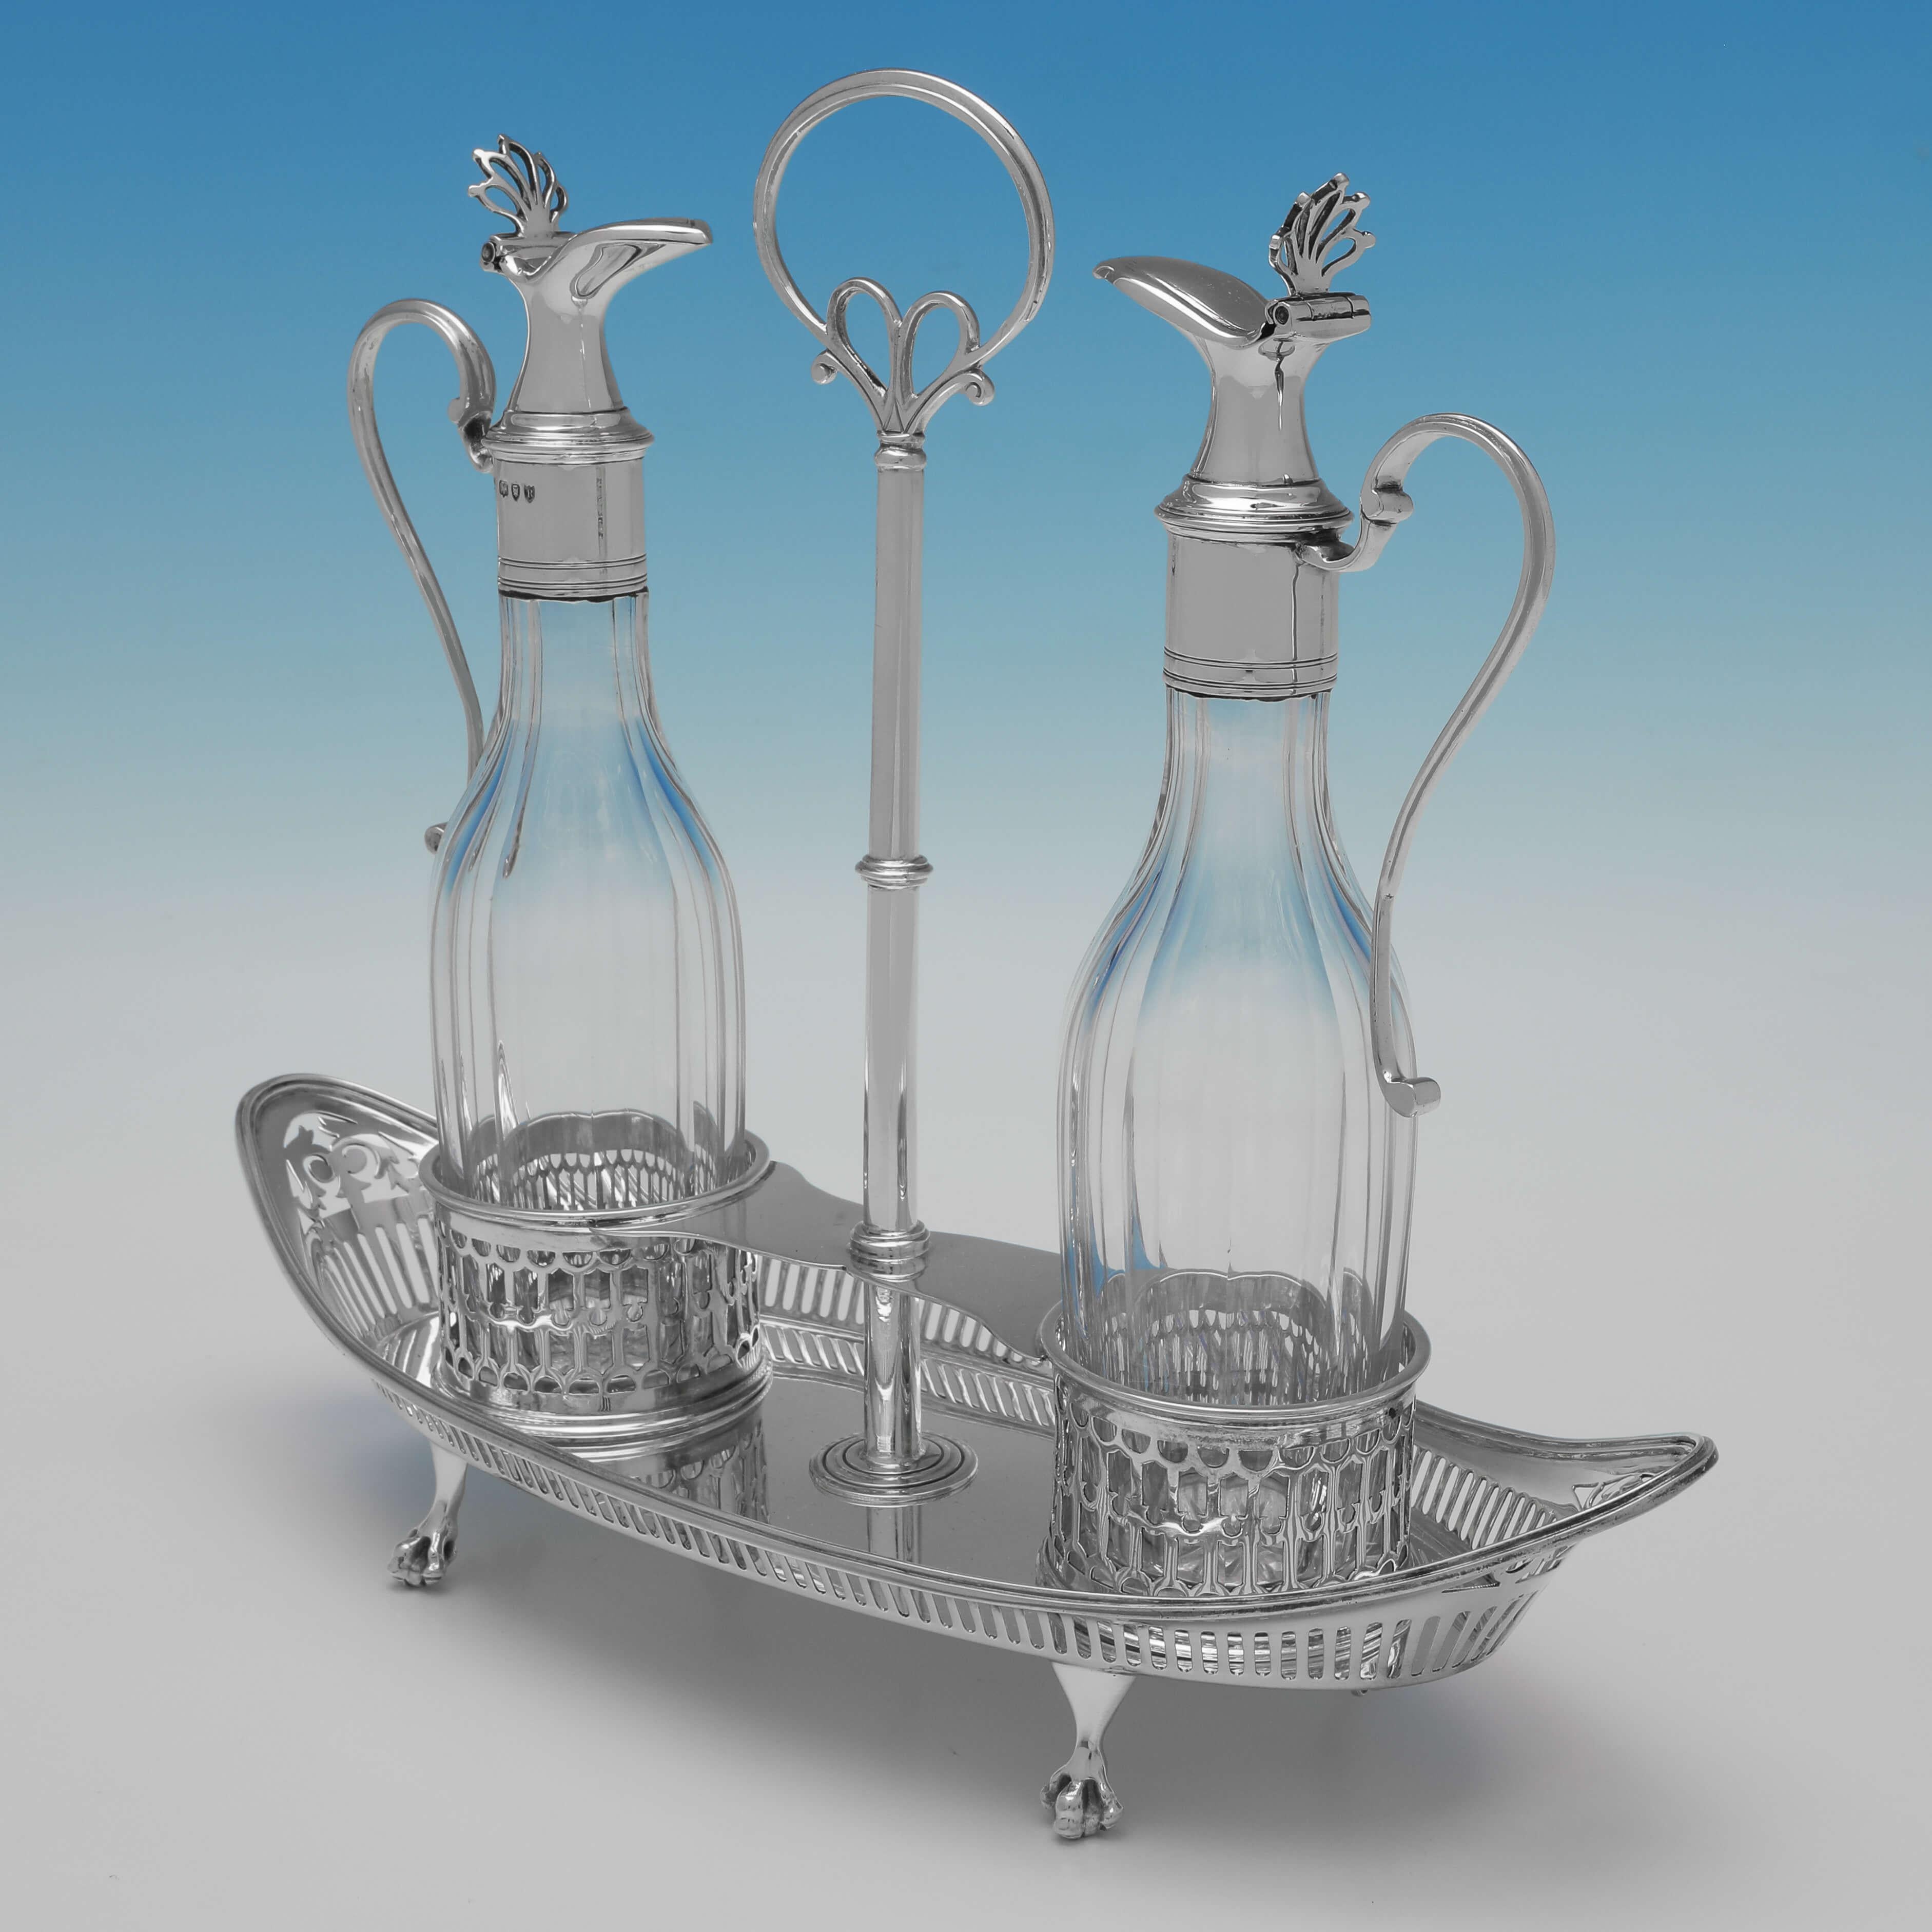 Hallmarked in London in 1892 by Thomas Bradbury & Sons, this attractive, Victorian, Antique Sterling Silver Oil & Vinegar Set, is in the Neoclassical revival style. 

The oil & vinegar measures 9.5